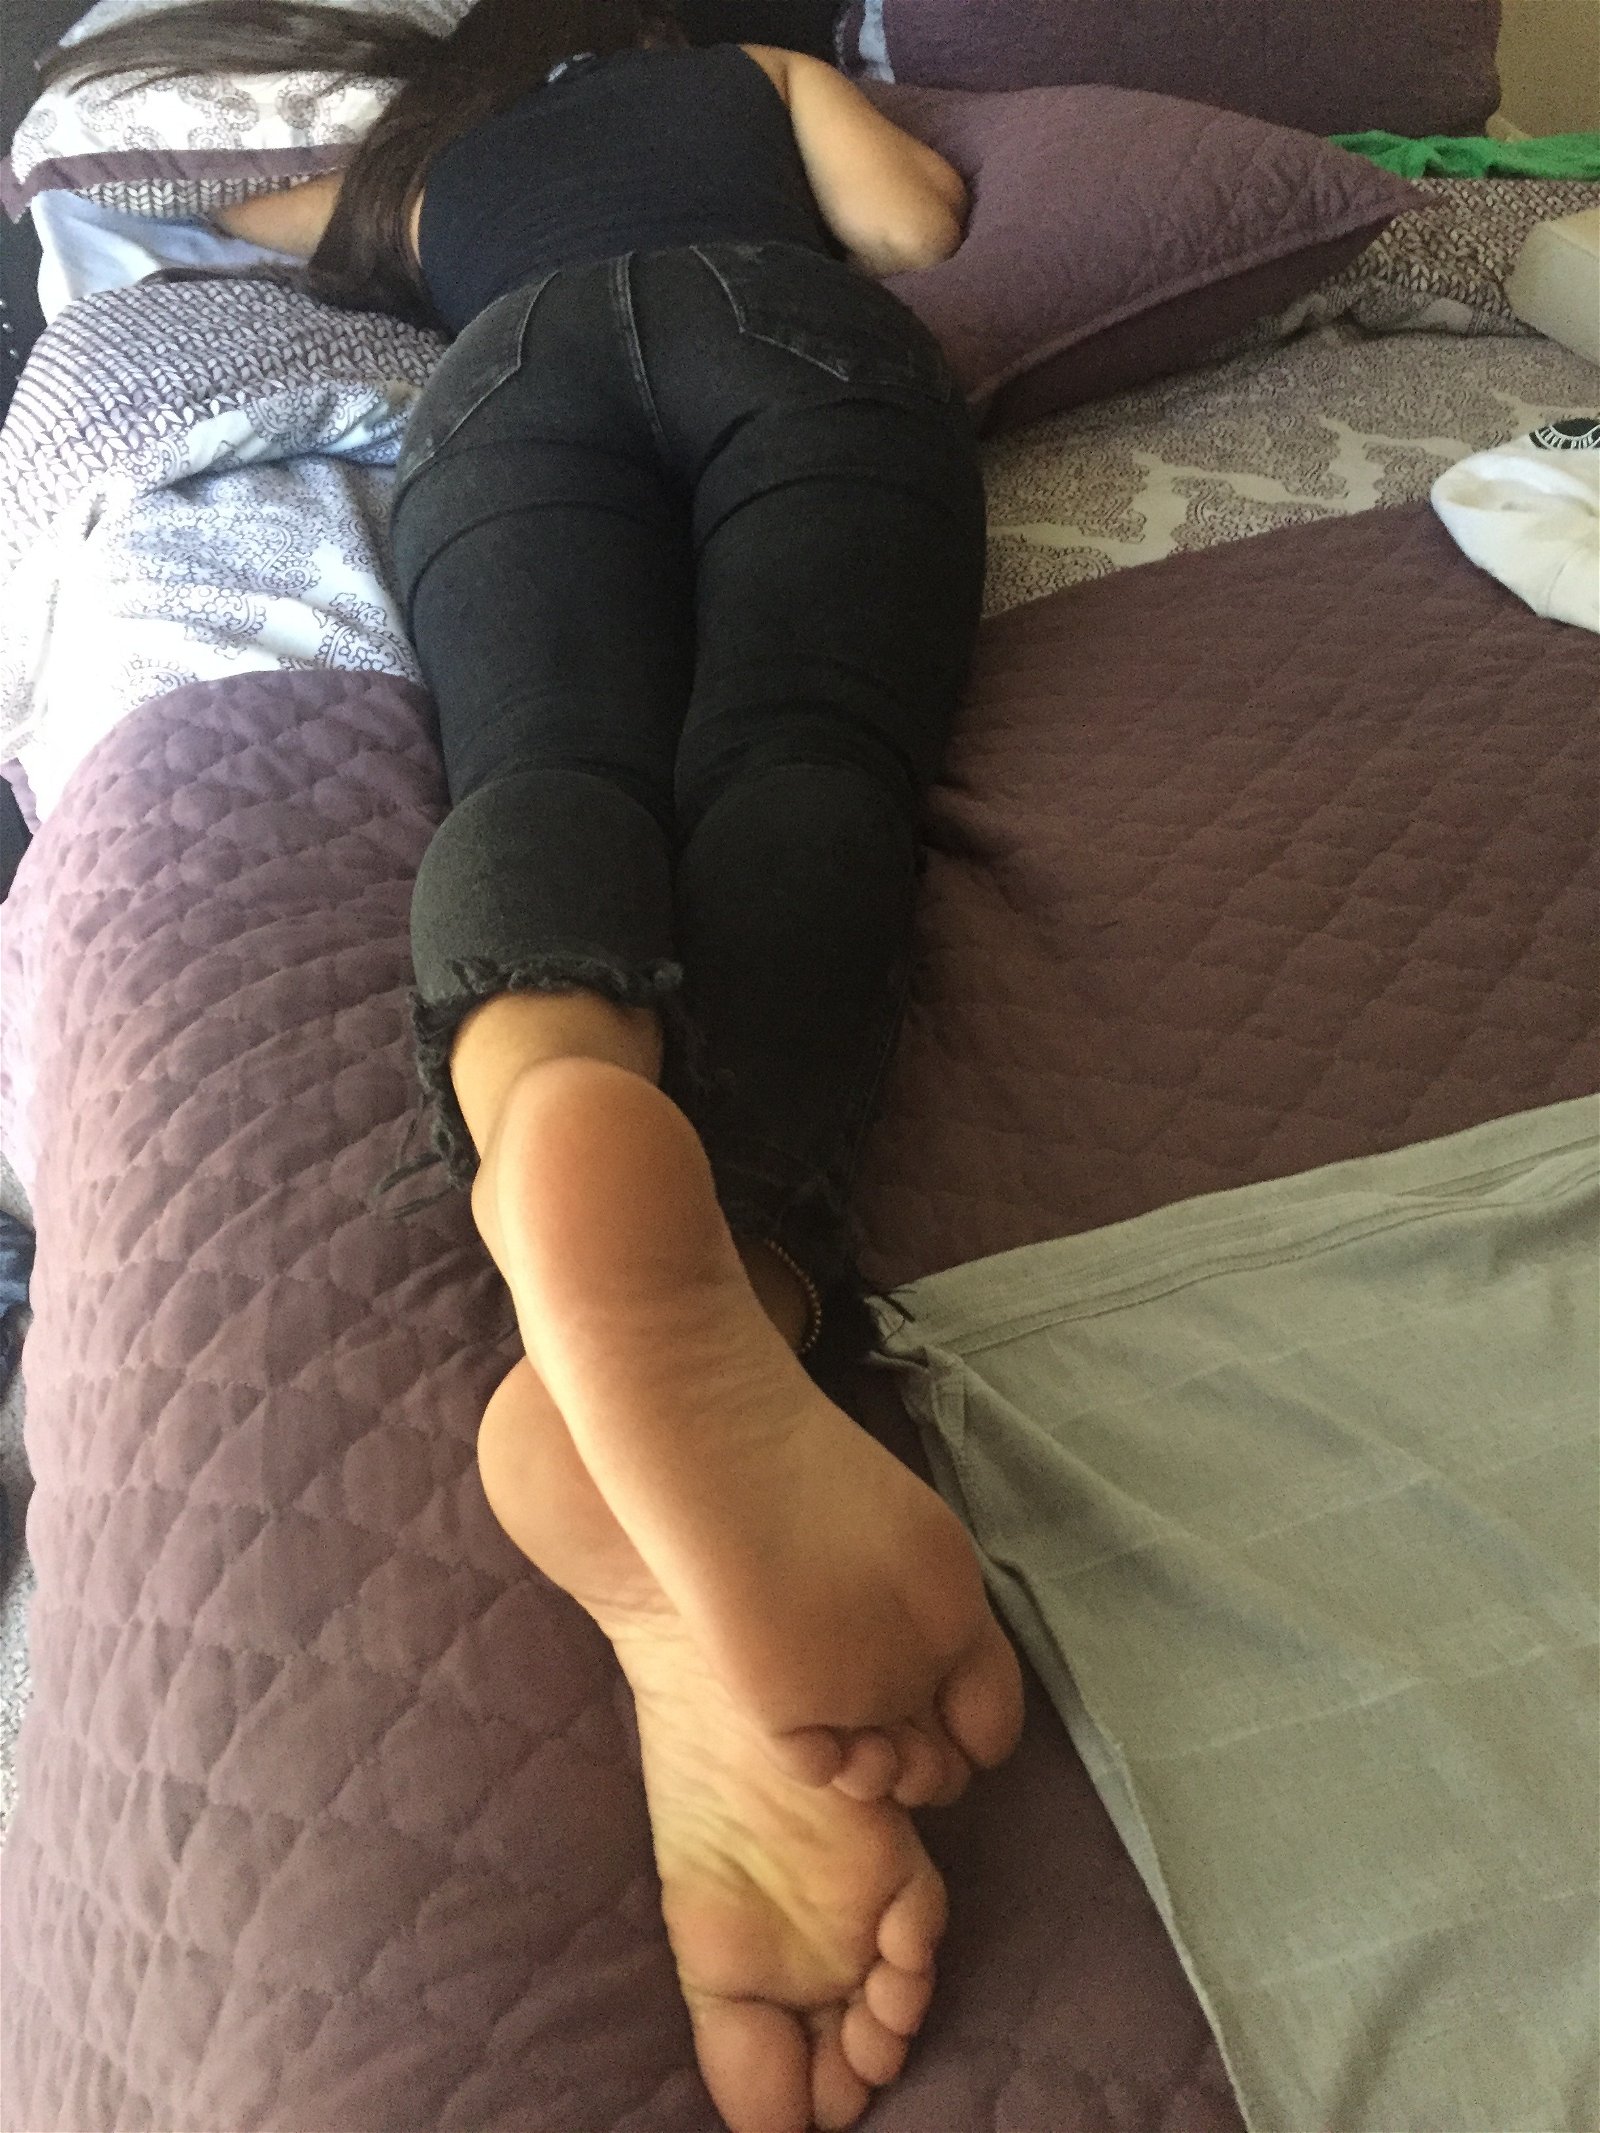 Photo by Nilegoddess with the username @Nilegoddess, who is a star user,  November 15, 2017 at 8:59 AM and the text says '#Sleeping  #toes  #feet  #fetish  #teen  #chick  #jeans  #passed  #out  #ass  #18  #year  #old  #18  #yo'